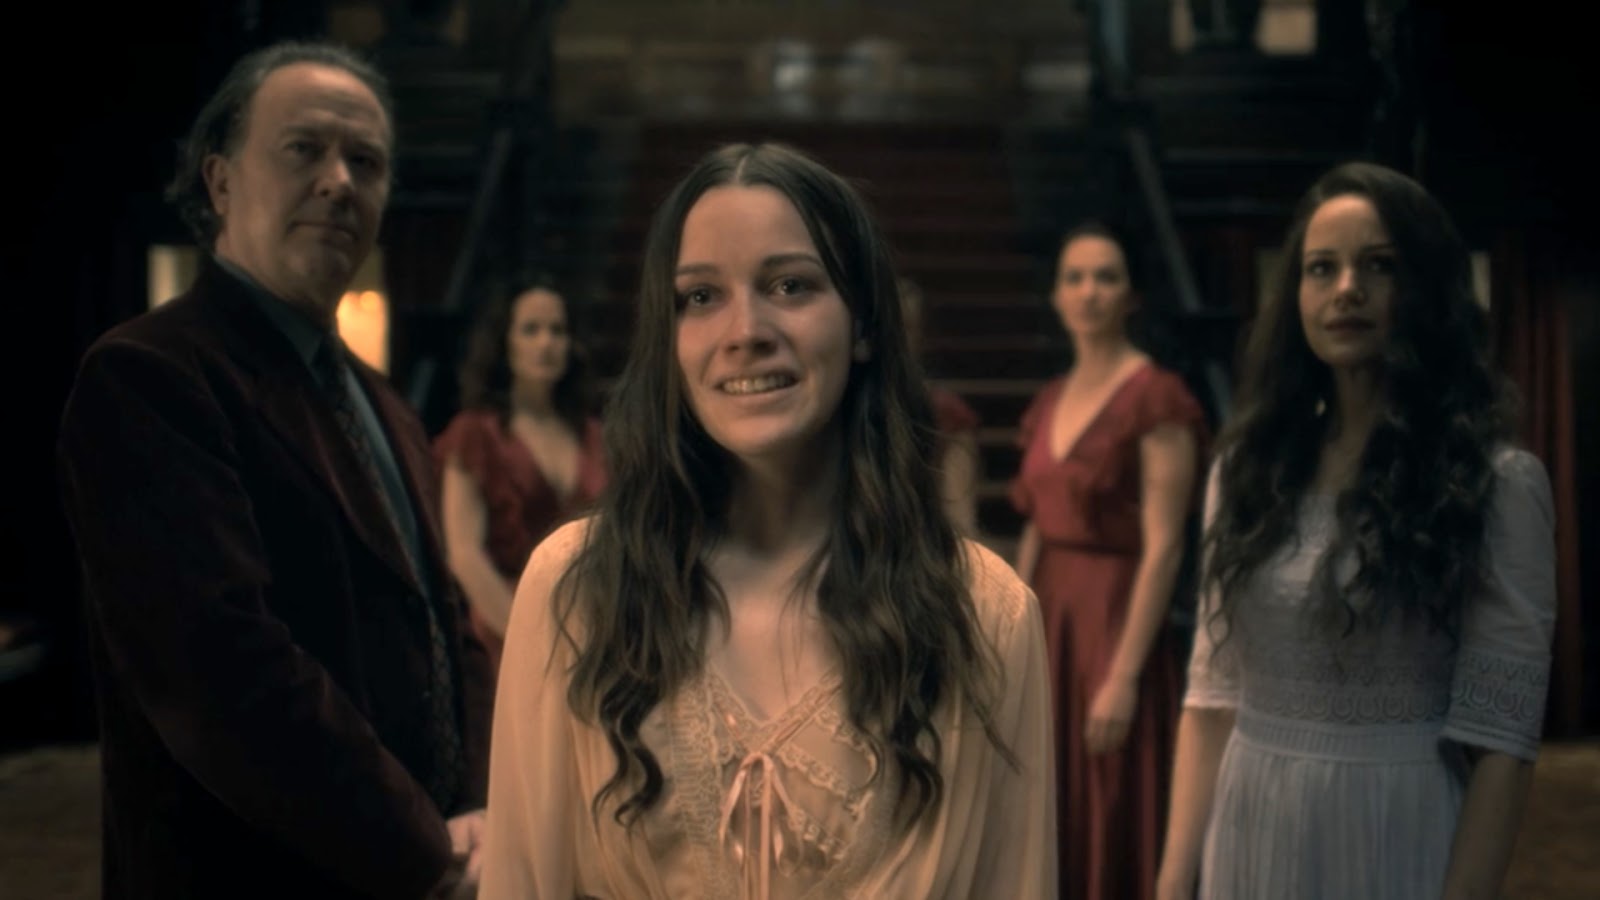 The Haunting of Hill House' Season 2 Cast to Include Original Stars – SheKnows